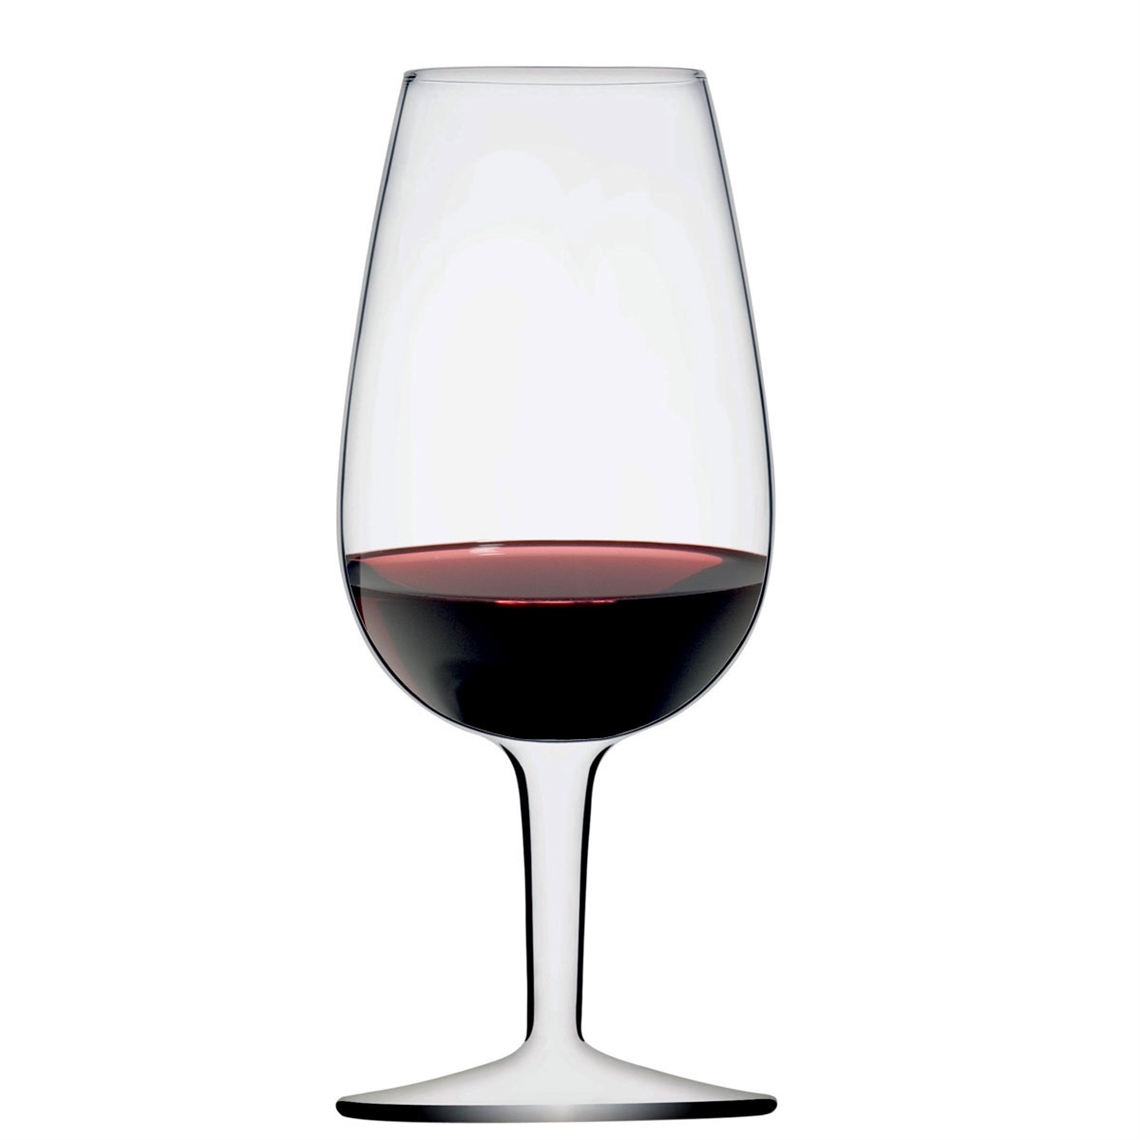 View more wine tasting from our Wine Tasting Glasses range